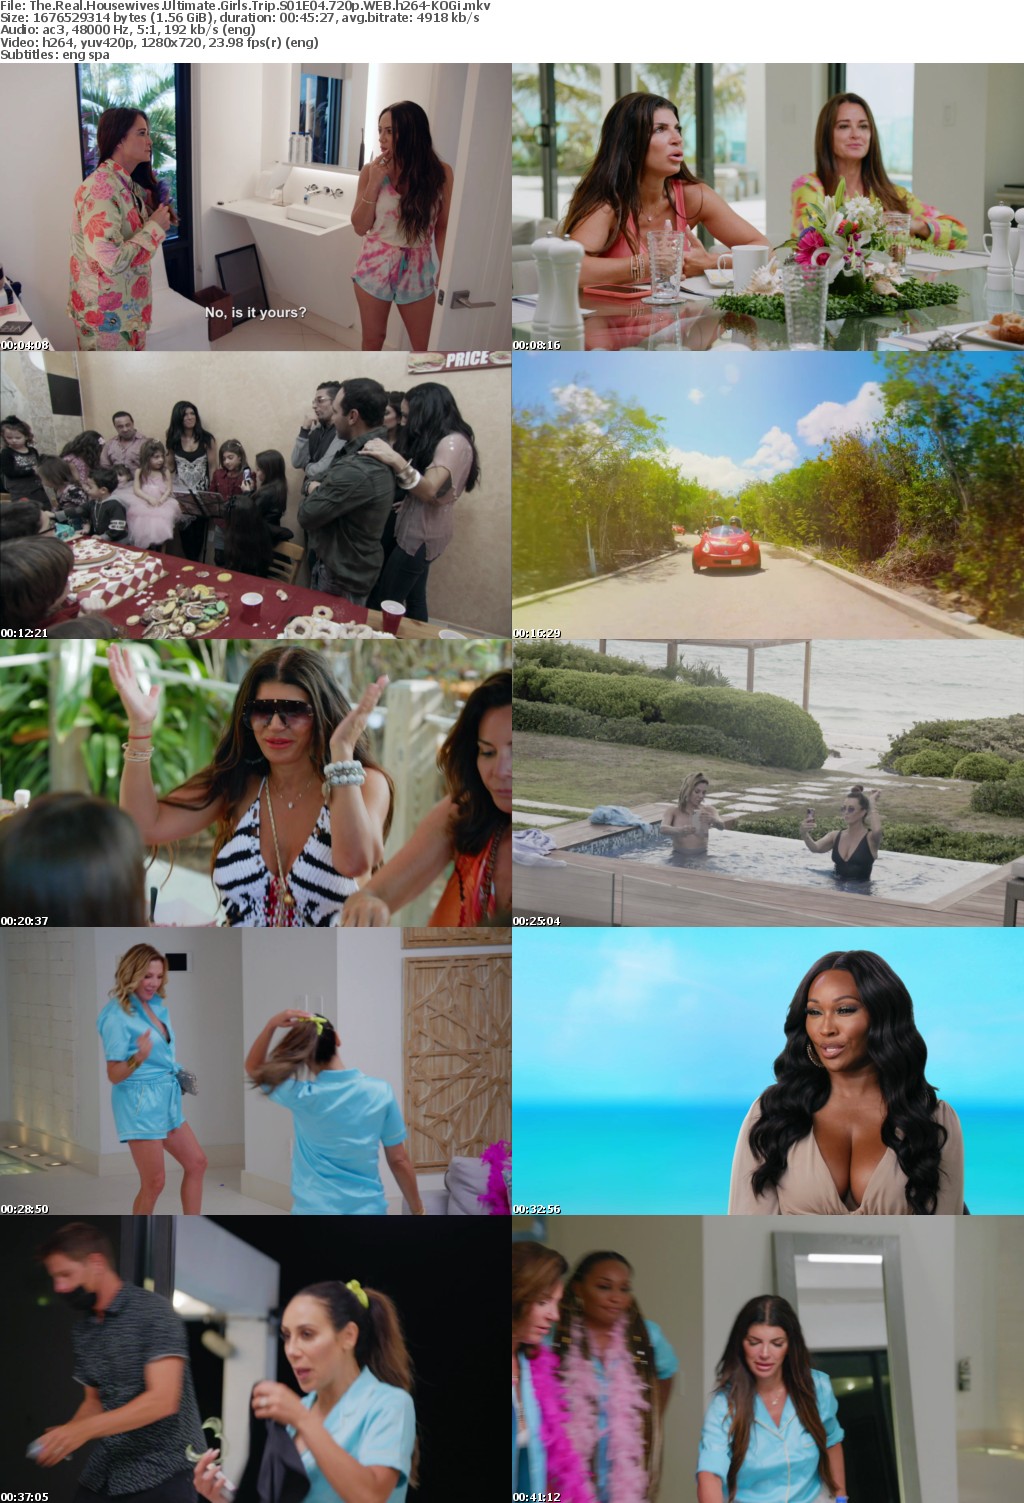 The Real Housewives Ultimate Girls Trip S01E04 720p WEB h264-KOGi